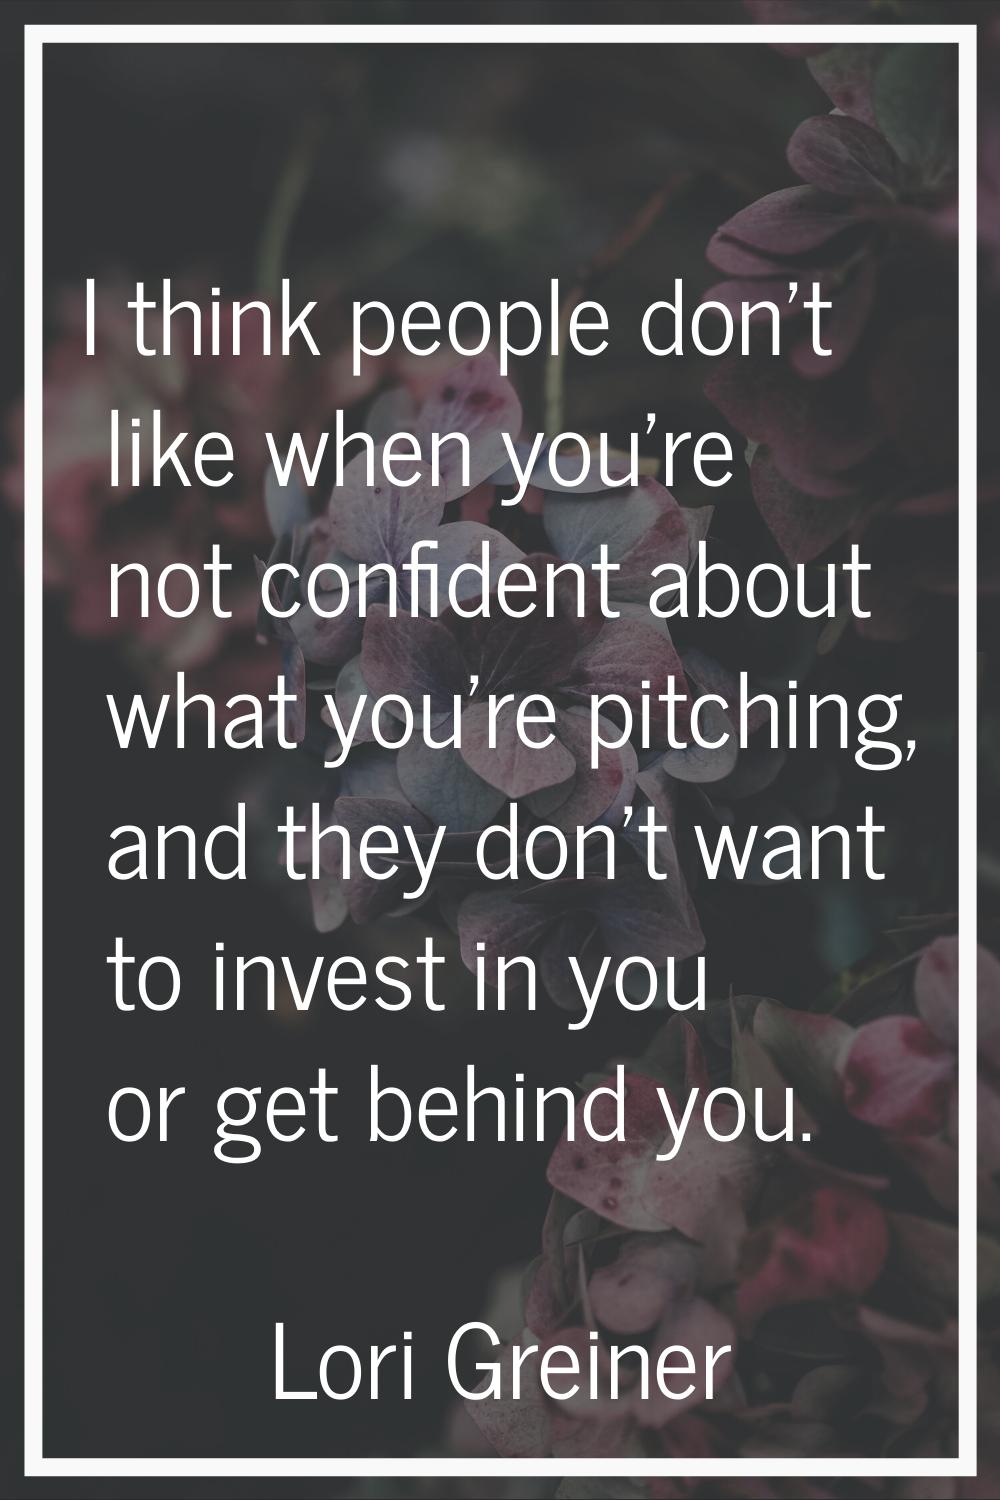 I think people don't like when you're not confident about what you're pitching, and they don't want